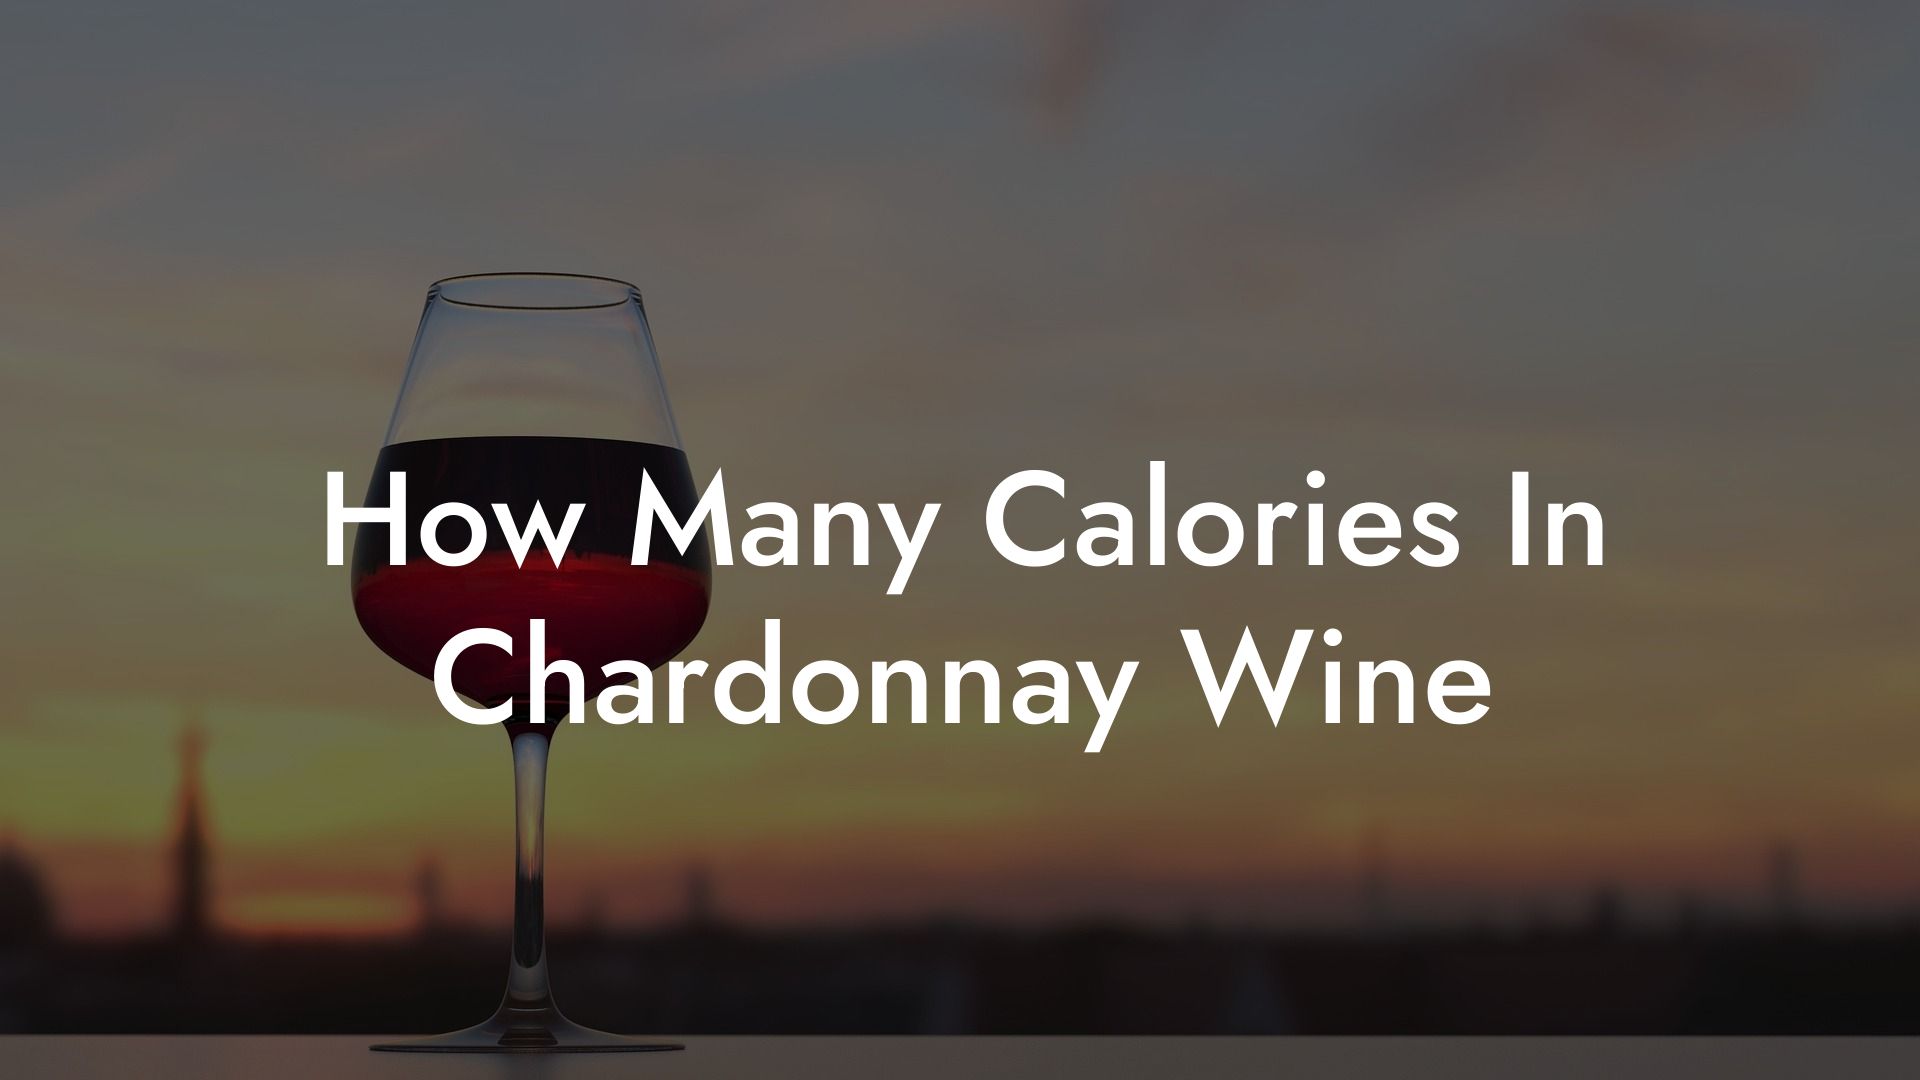 How Many Calories In Chardonnay Wine